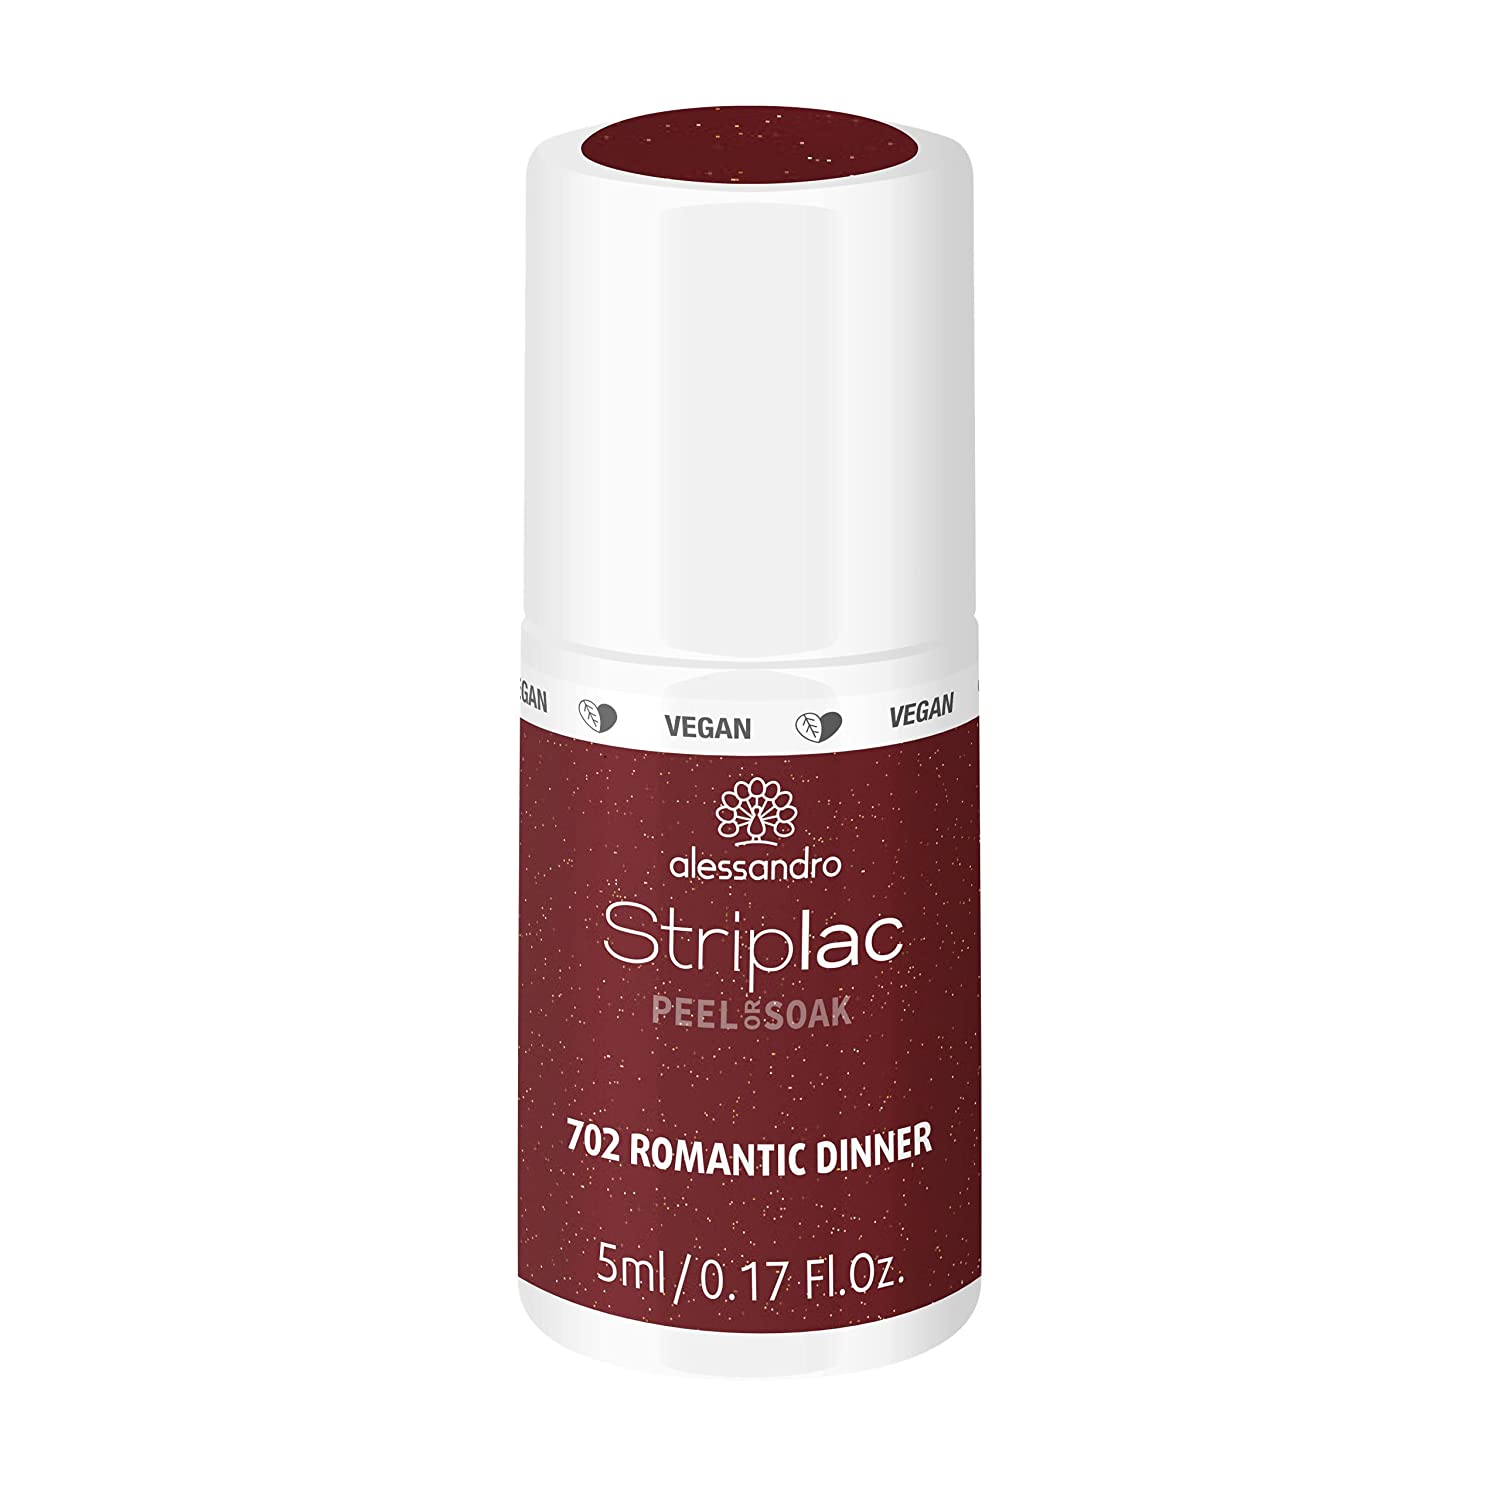 alessandro Striplac Peel or Soak BACI D\'AMORE- Romantic Dinner - Vegan LED Nail Polish in Strong Burgundy - For Perfect Nails in 15 Minutes, 5 ml, ‎romantic